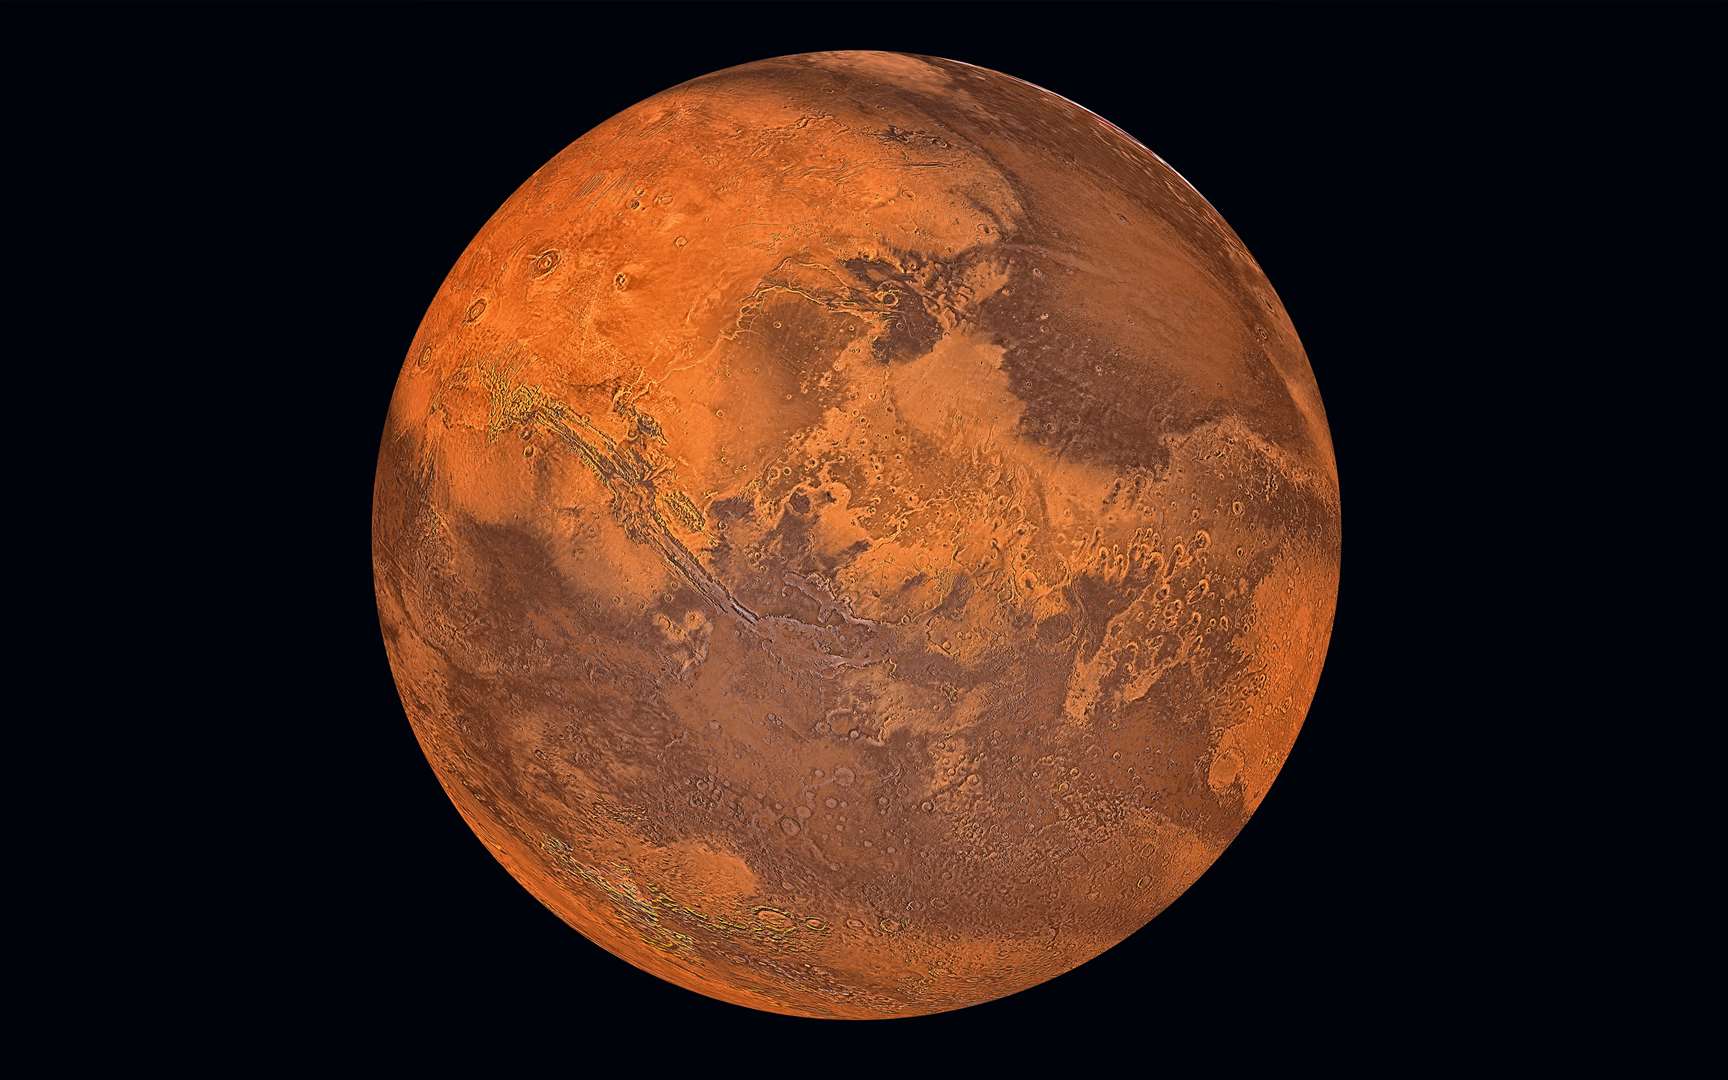 Mars will be the dimmer of the two planets